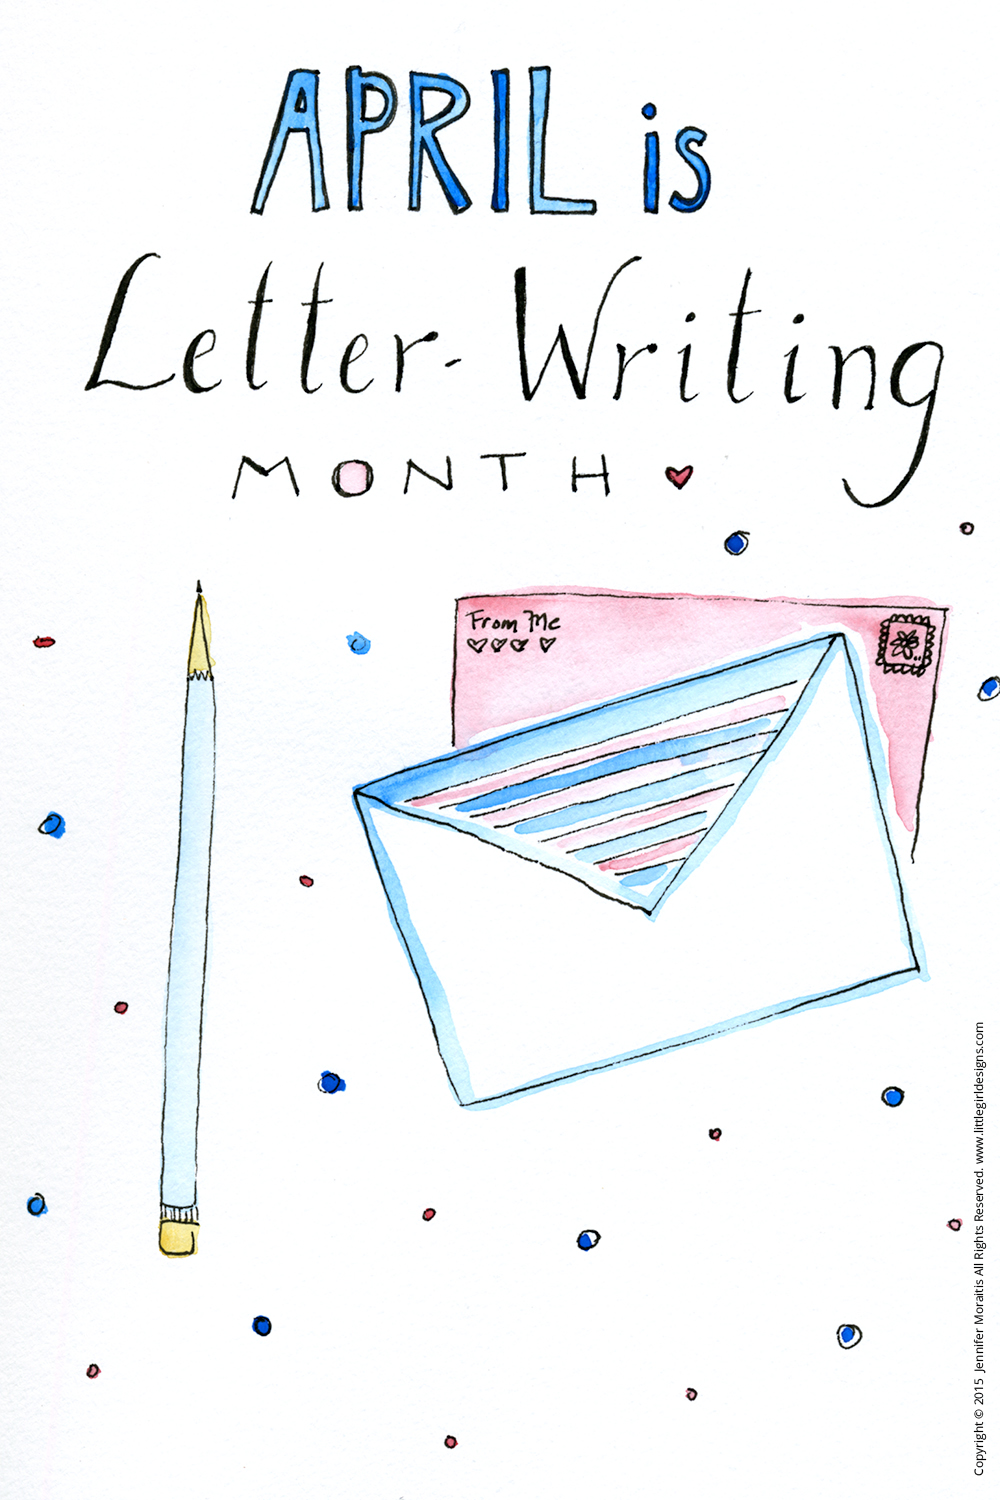 Did you know April is Letter Writing Month? Let's bring back snail mail with tips, tutorials, printables, and prompts for all things letter writing! Yay for old-fashioned cards and mail!